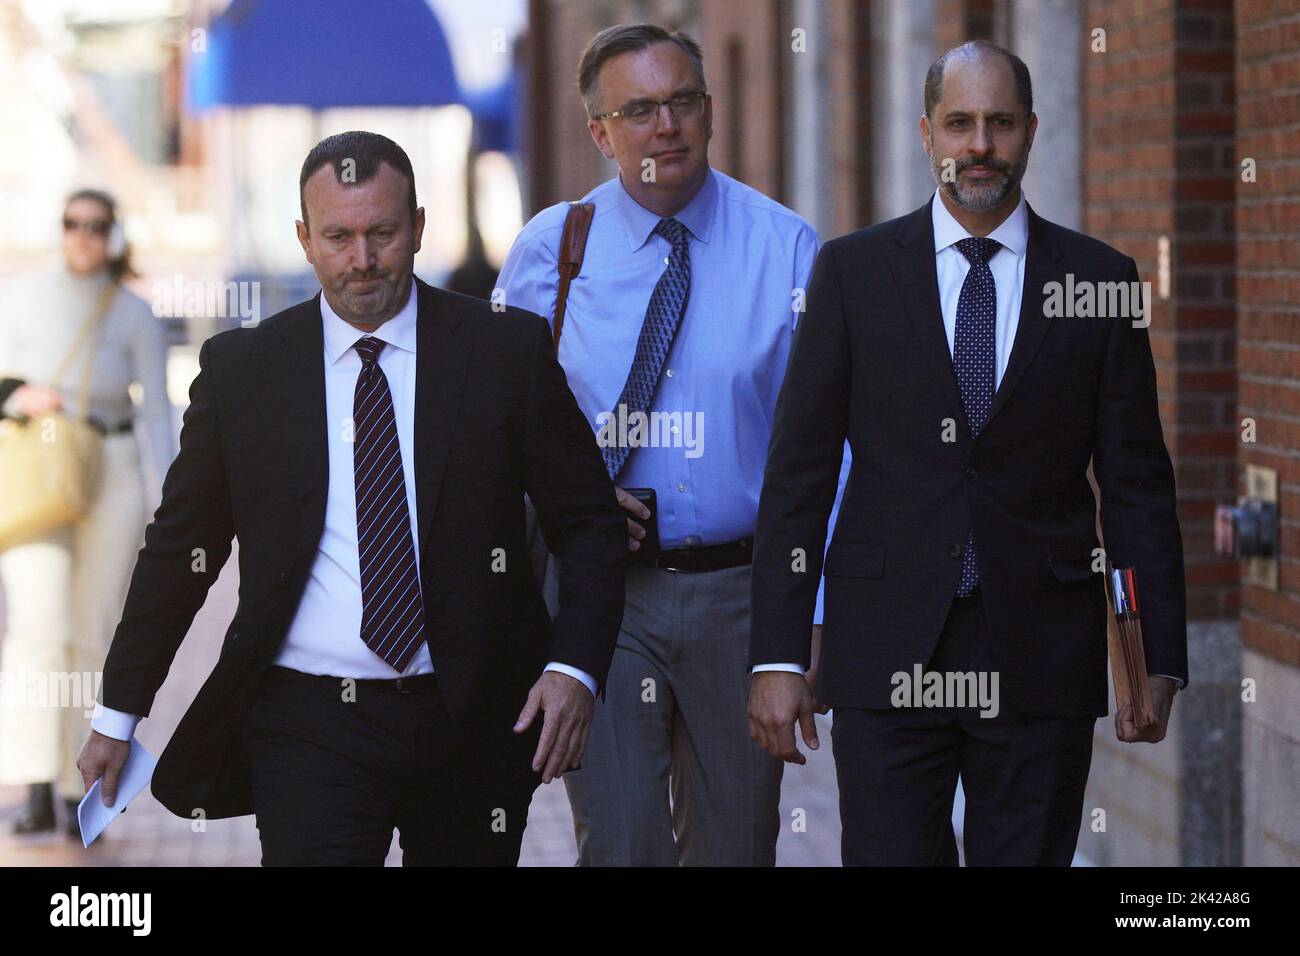 Former eBay Inc security executive Jim Baugh, with his attorneys William Fick and Daniel Marx, arrives at the federal courthouse to be sentenced after pleading guilty for orchestrating a crusade to harass a Massachusetts couple with threats and disturbing home deliveries after their online newsletter angered the company's then-CEO, in Boston, Massachusetts, U.S., September 29, 2022.     REUTERS/Brian Snyder Stock Photo